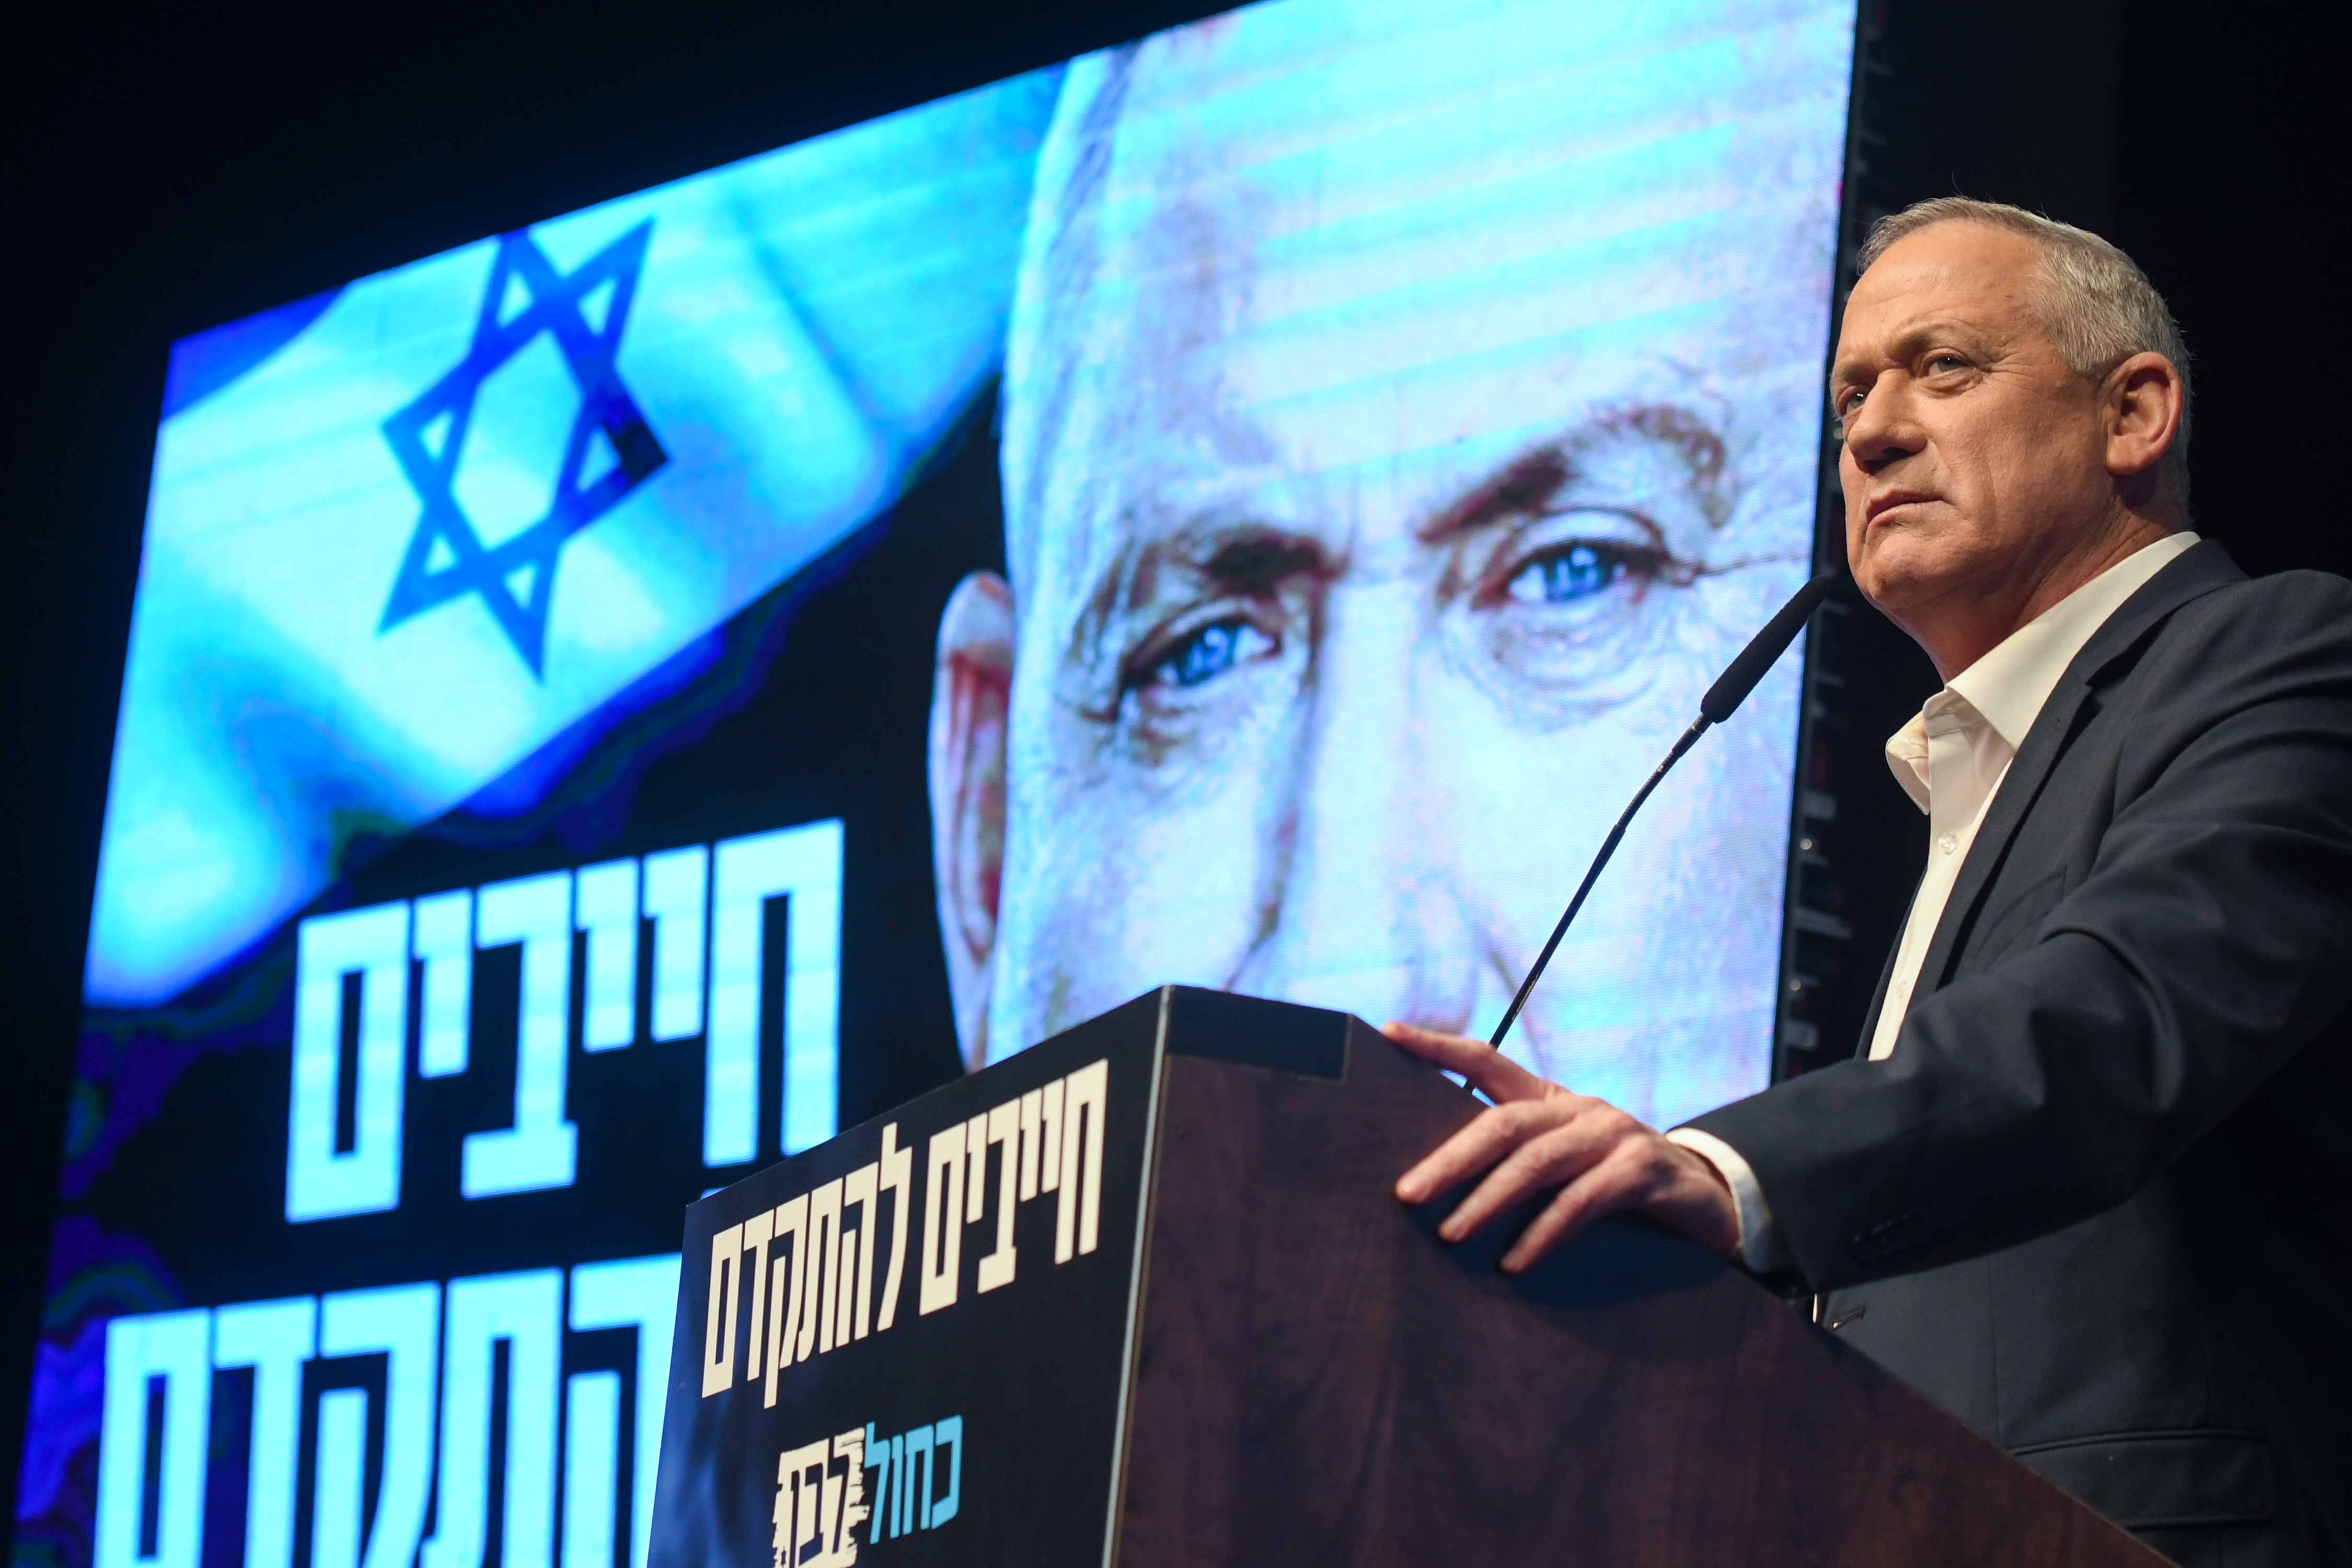 Benny Gantz, leader of Blue and White party, during an election campaign event in Ramat Gan, near Tel Aviv on February 25, 2020. (Artur Widak—NurPhoto/Getty Images)